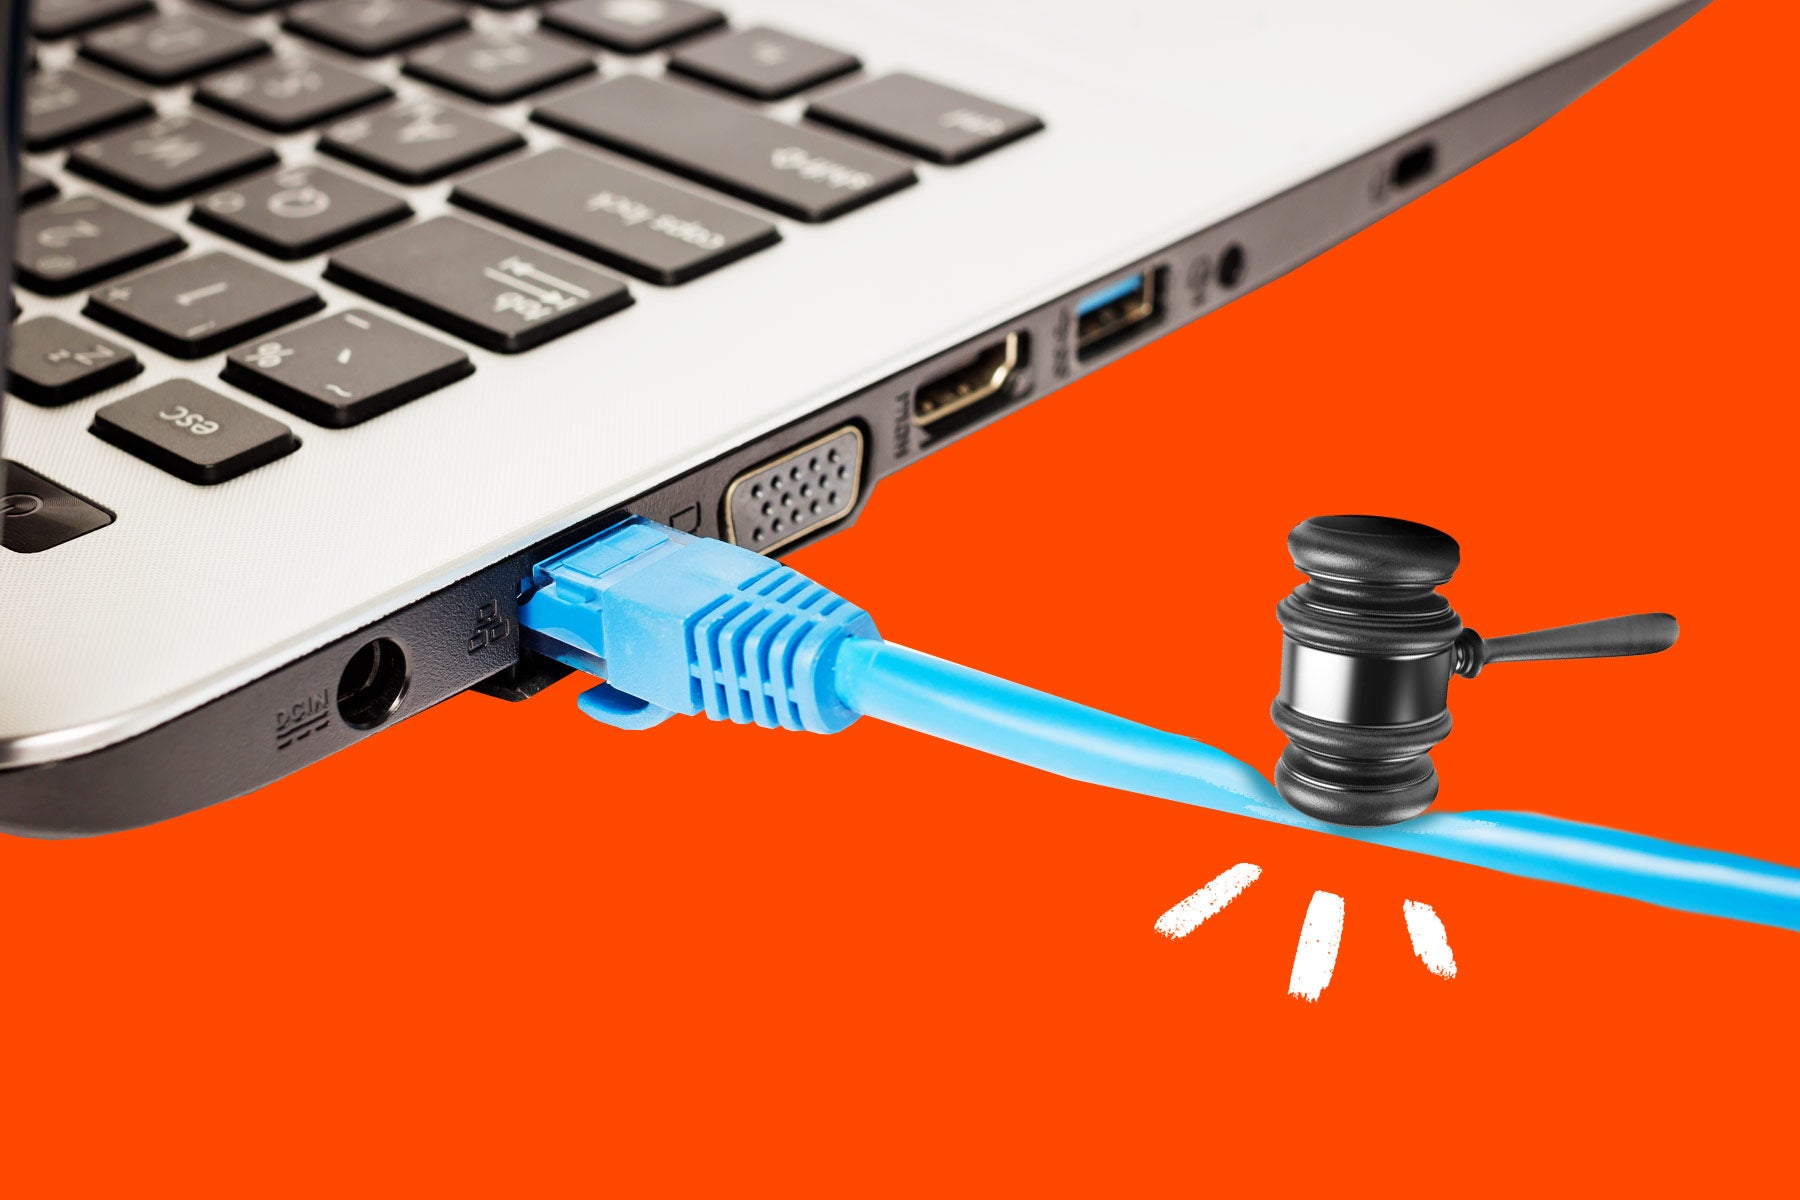 Photo illustration of a gavel coming down on an ethernet cable attached to a Mac laptop.